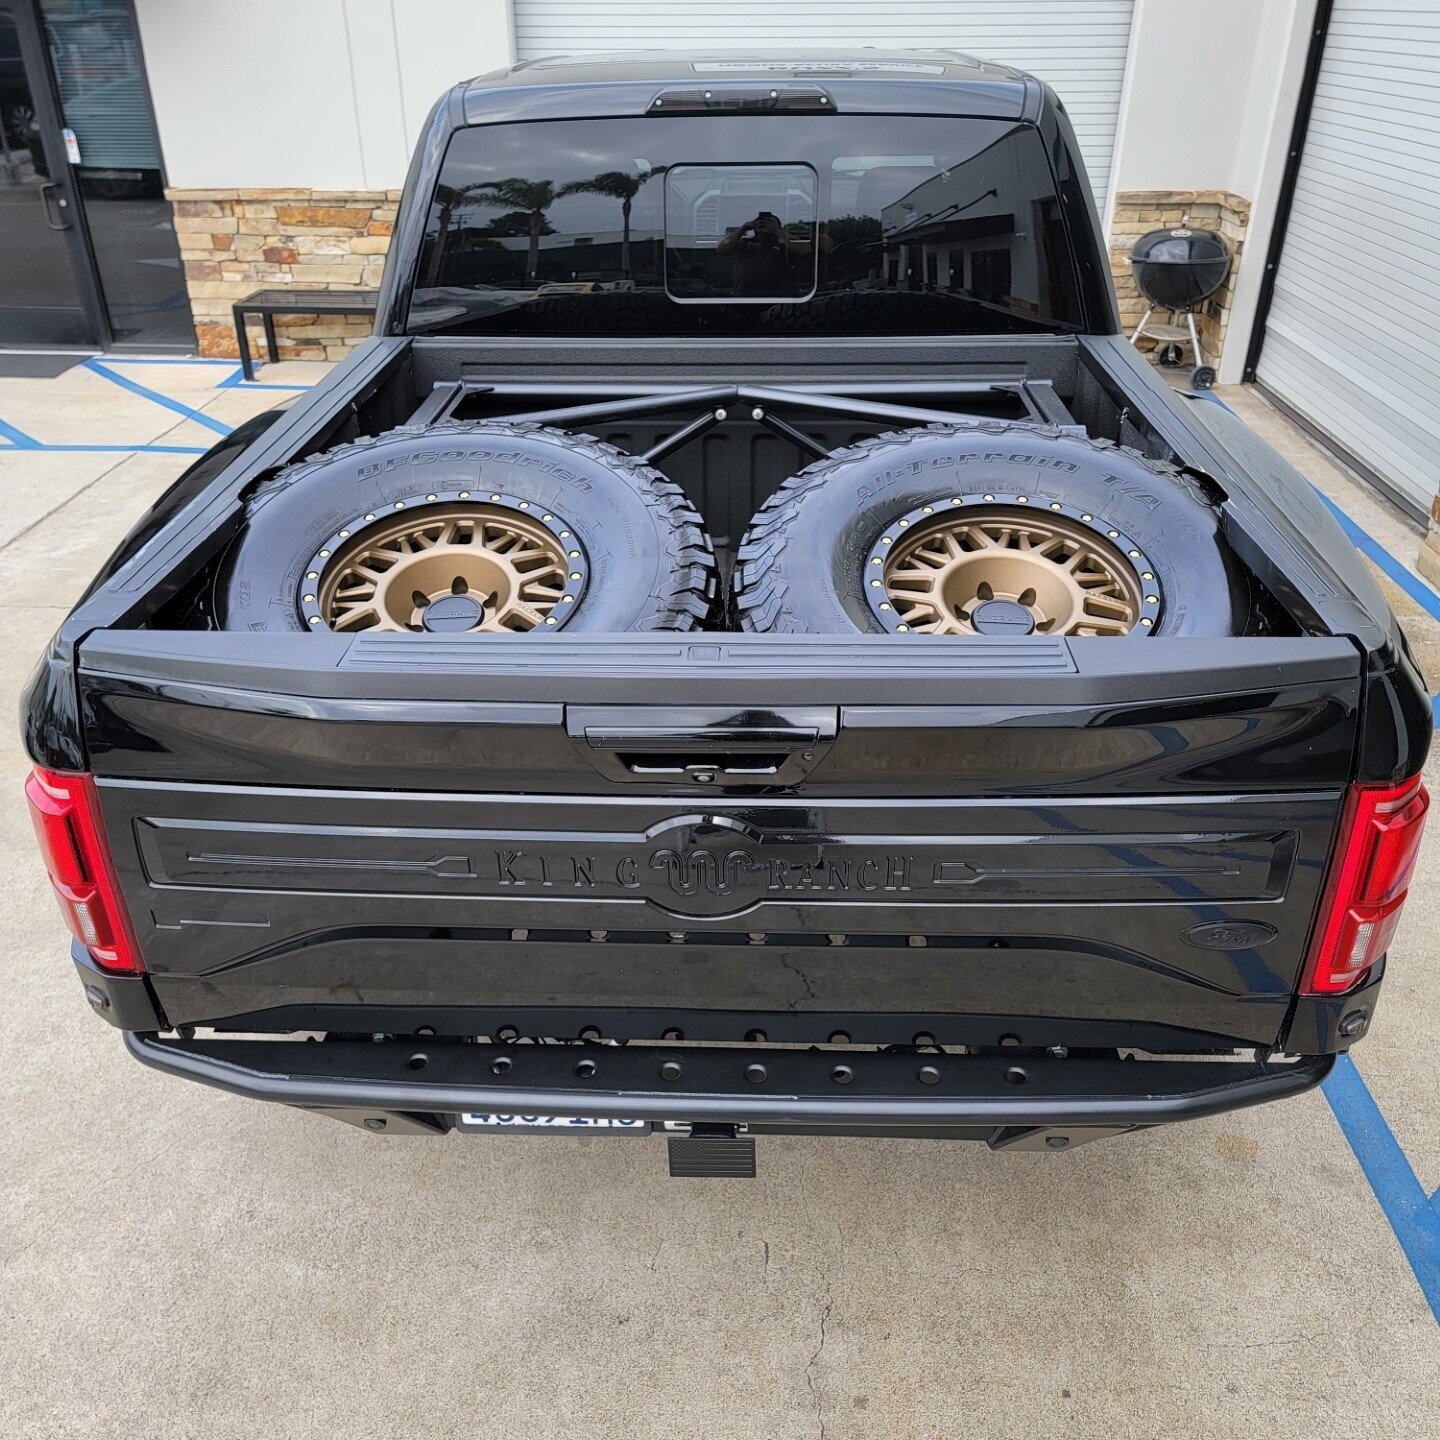 New Style Prerunner Tire Carriers are in the works. We are moving them towards the cab slightly and relocating the bed supports inside the tailgate. No more need to get rid of the tailgate and they sit inside the bed perfectly... Thanks to @wolffangs